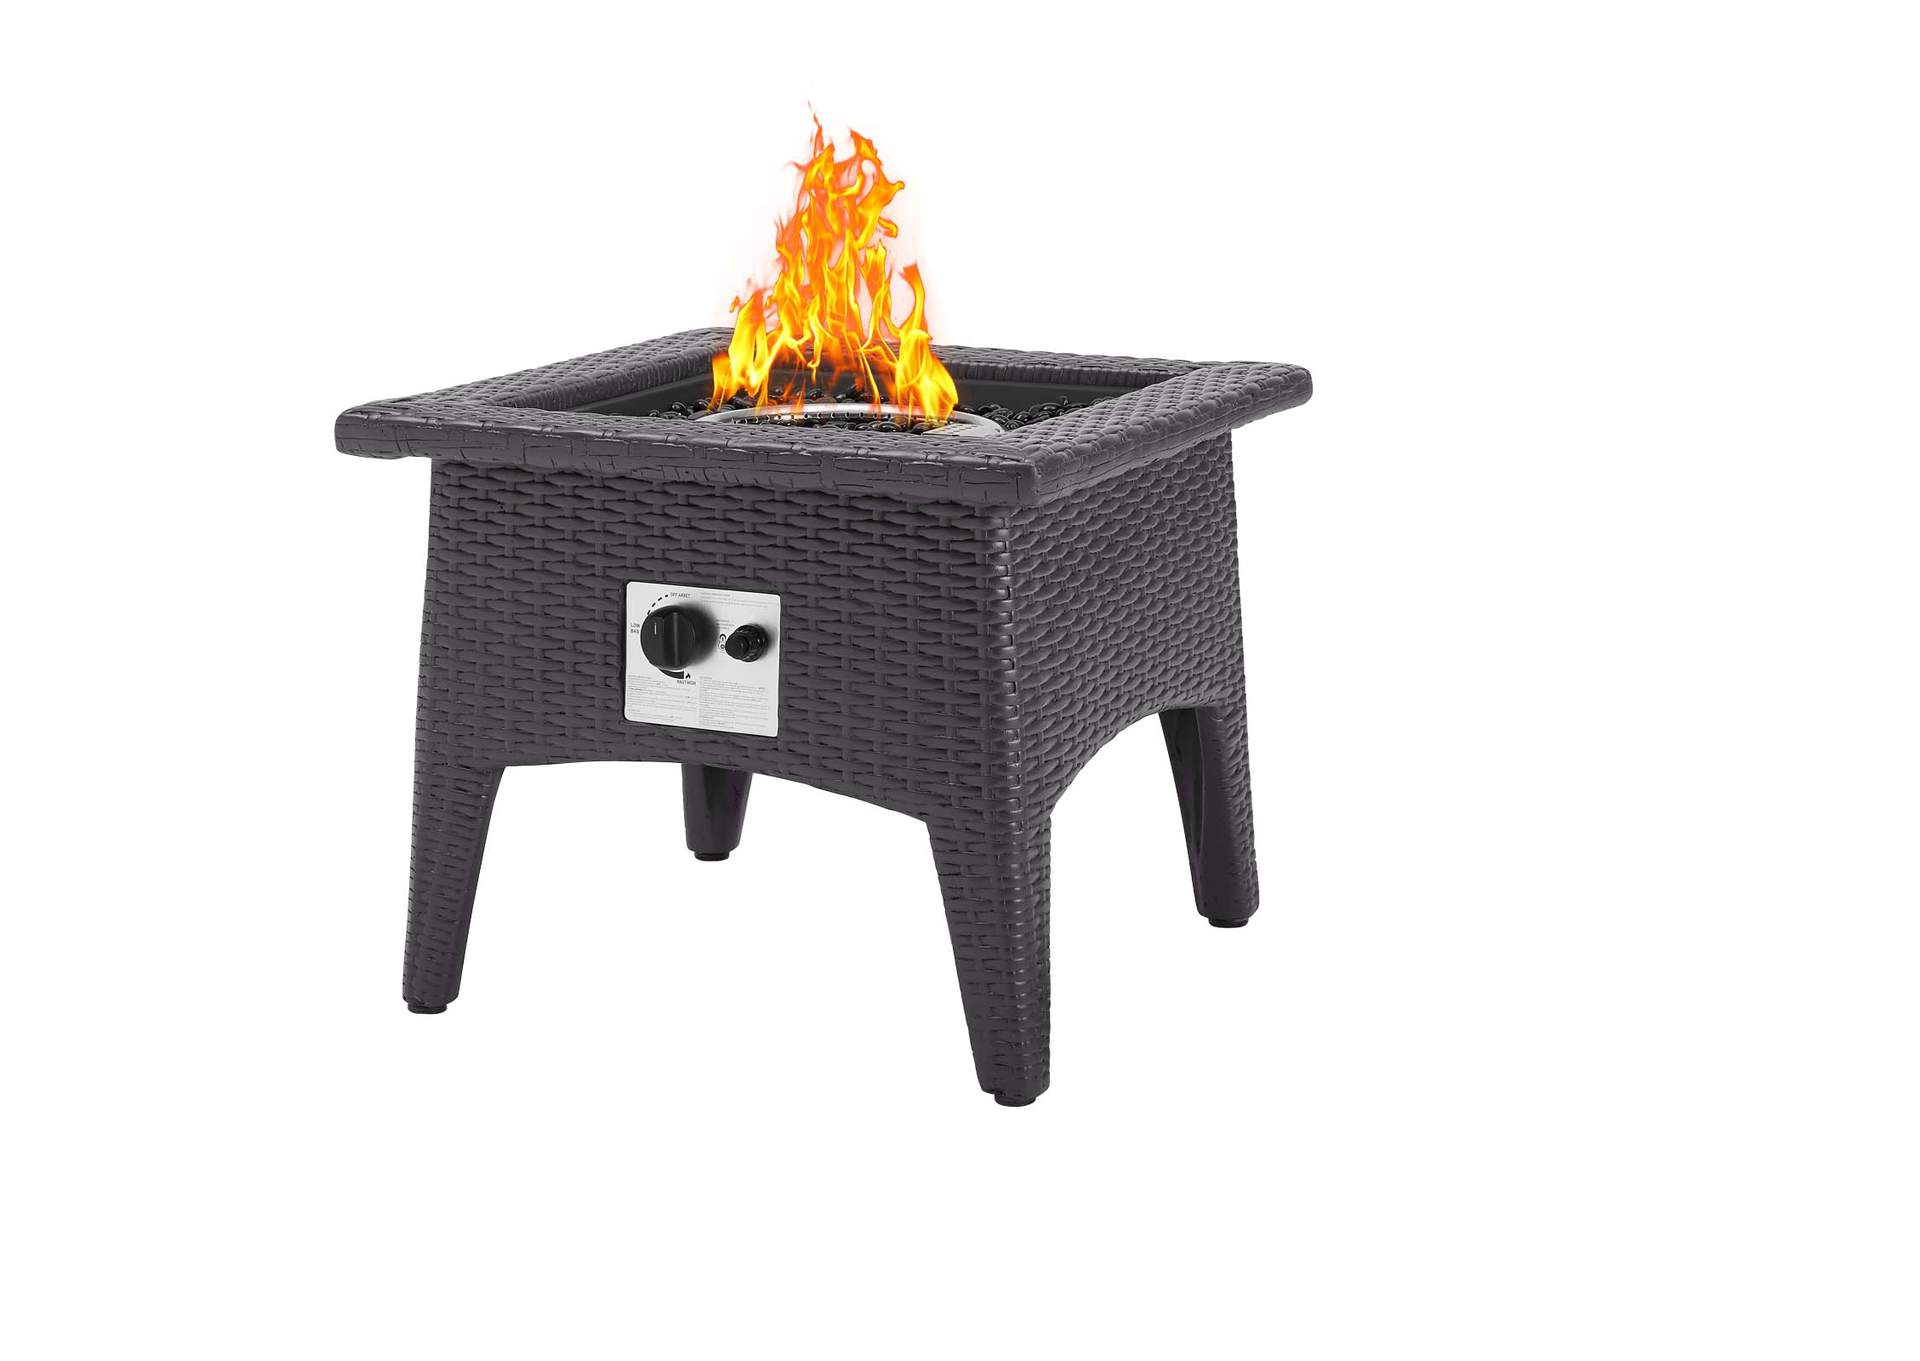 Espresso Turquois Convene 3 Piece Set Outdoor Patio with Fire Pit,Modway